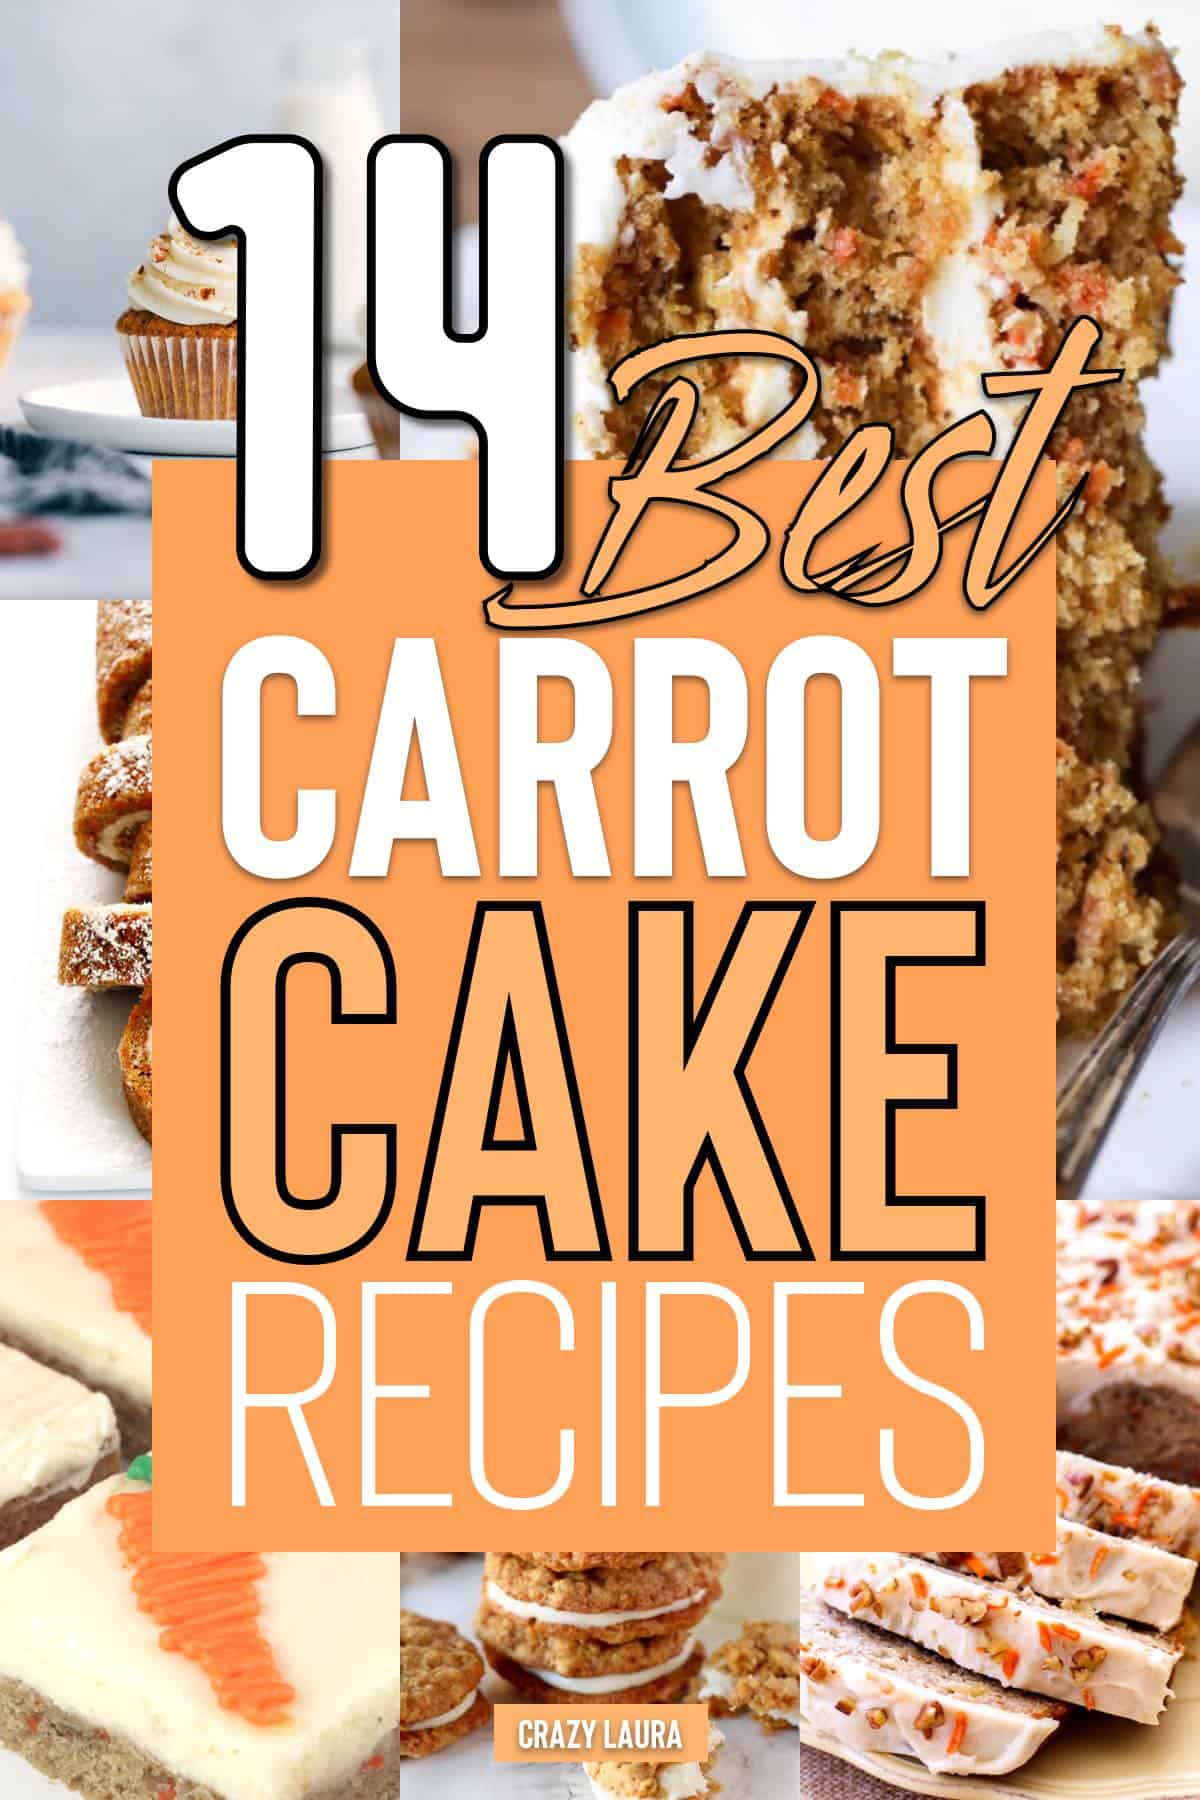 cake recipes with carrot